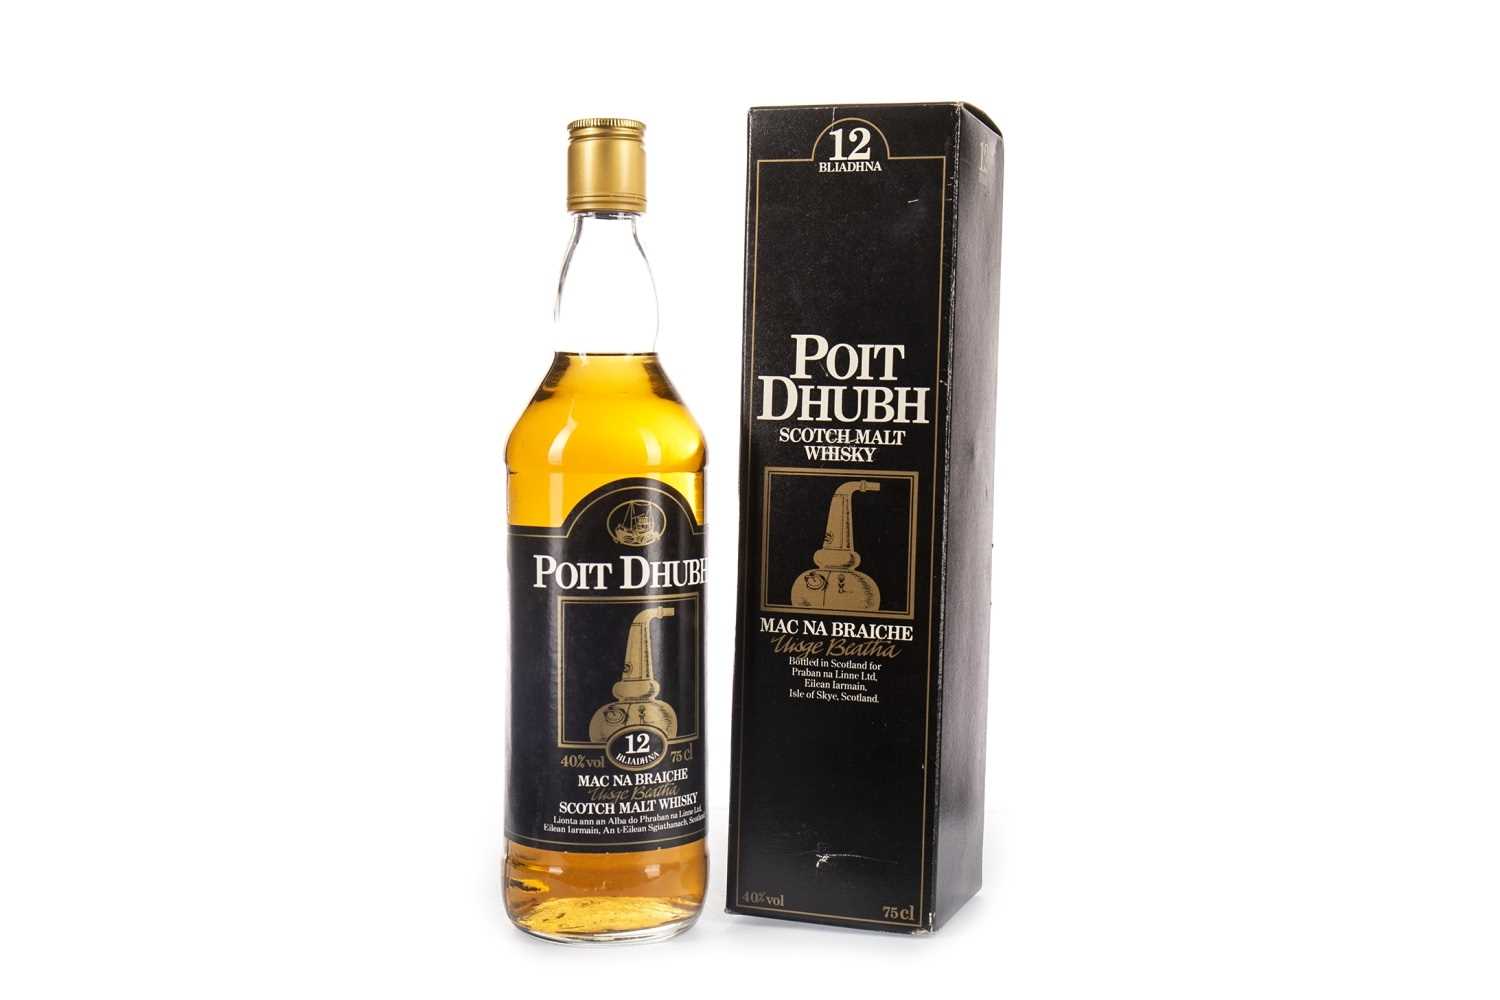 Lot 449 - POIT DHUBH 12 YEARS OLD